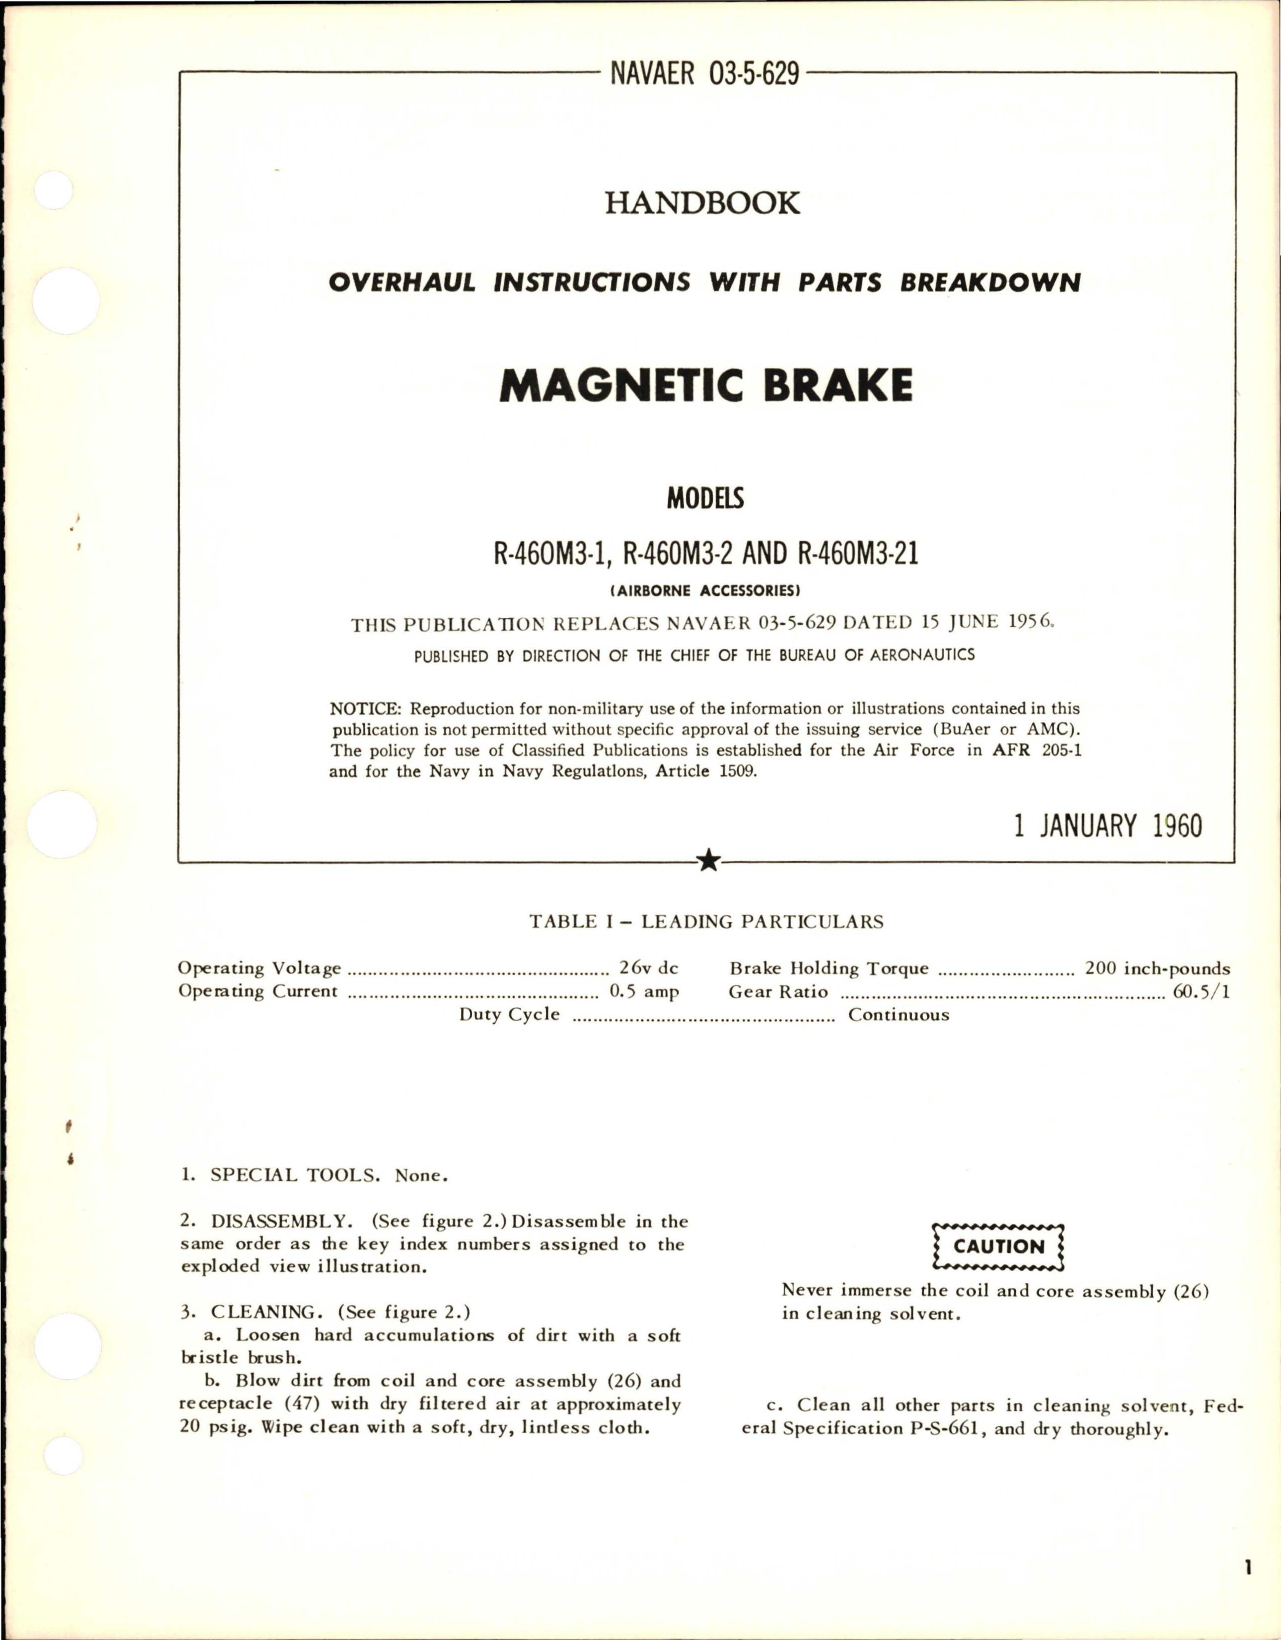 Sample page 1 from AirCorps Library document: Overhaul Instructions with Parts Breakdown for Magnetic Brake - Models R-460M3-1, R-460M3-2, and R-460M3-21